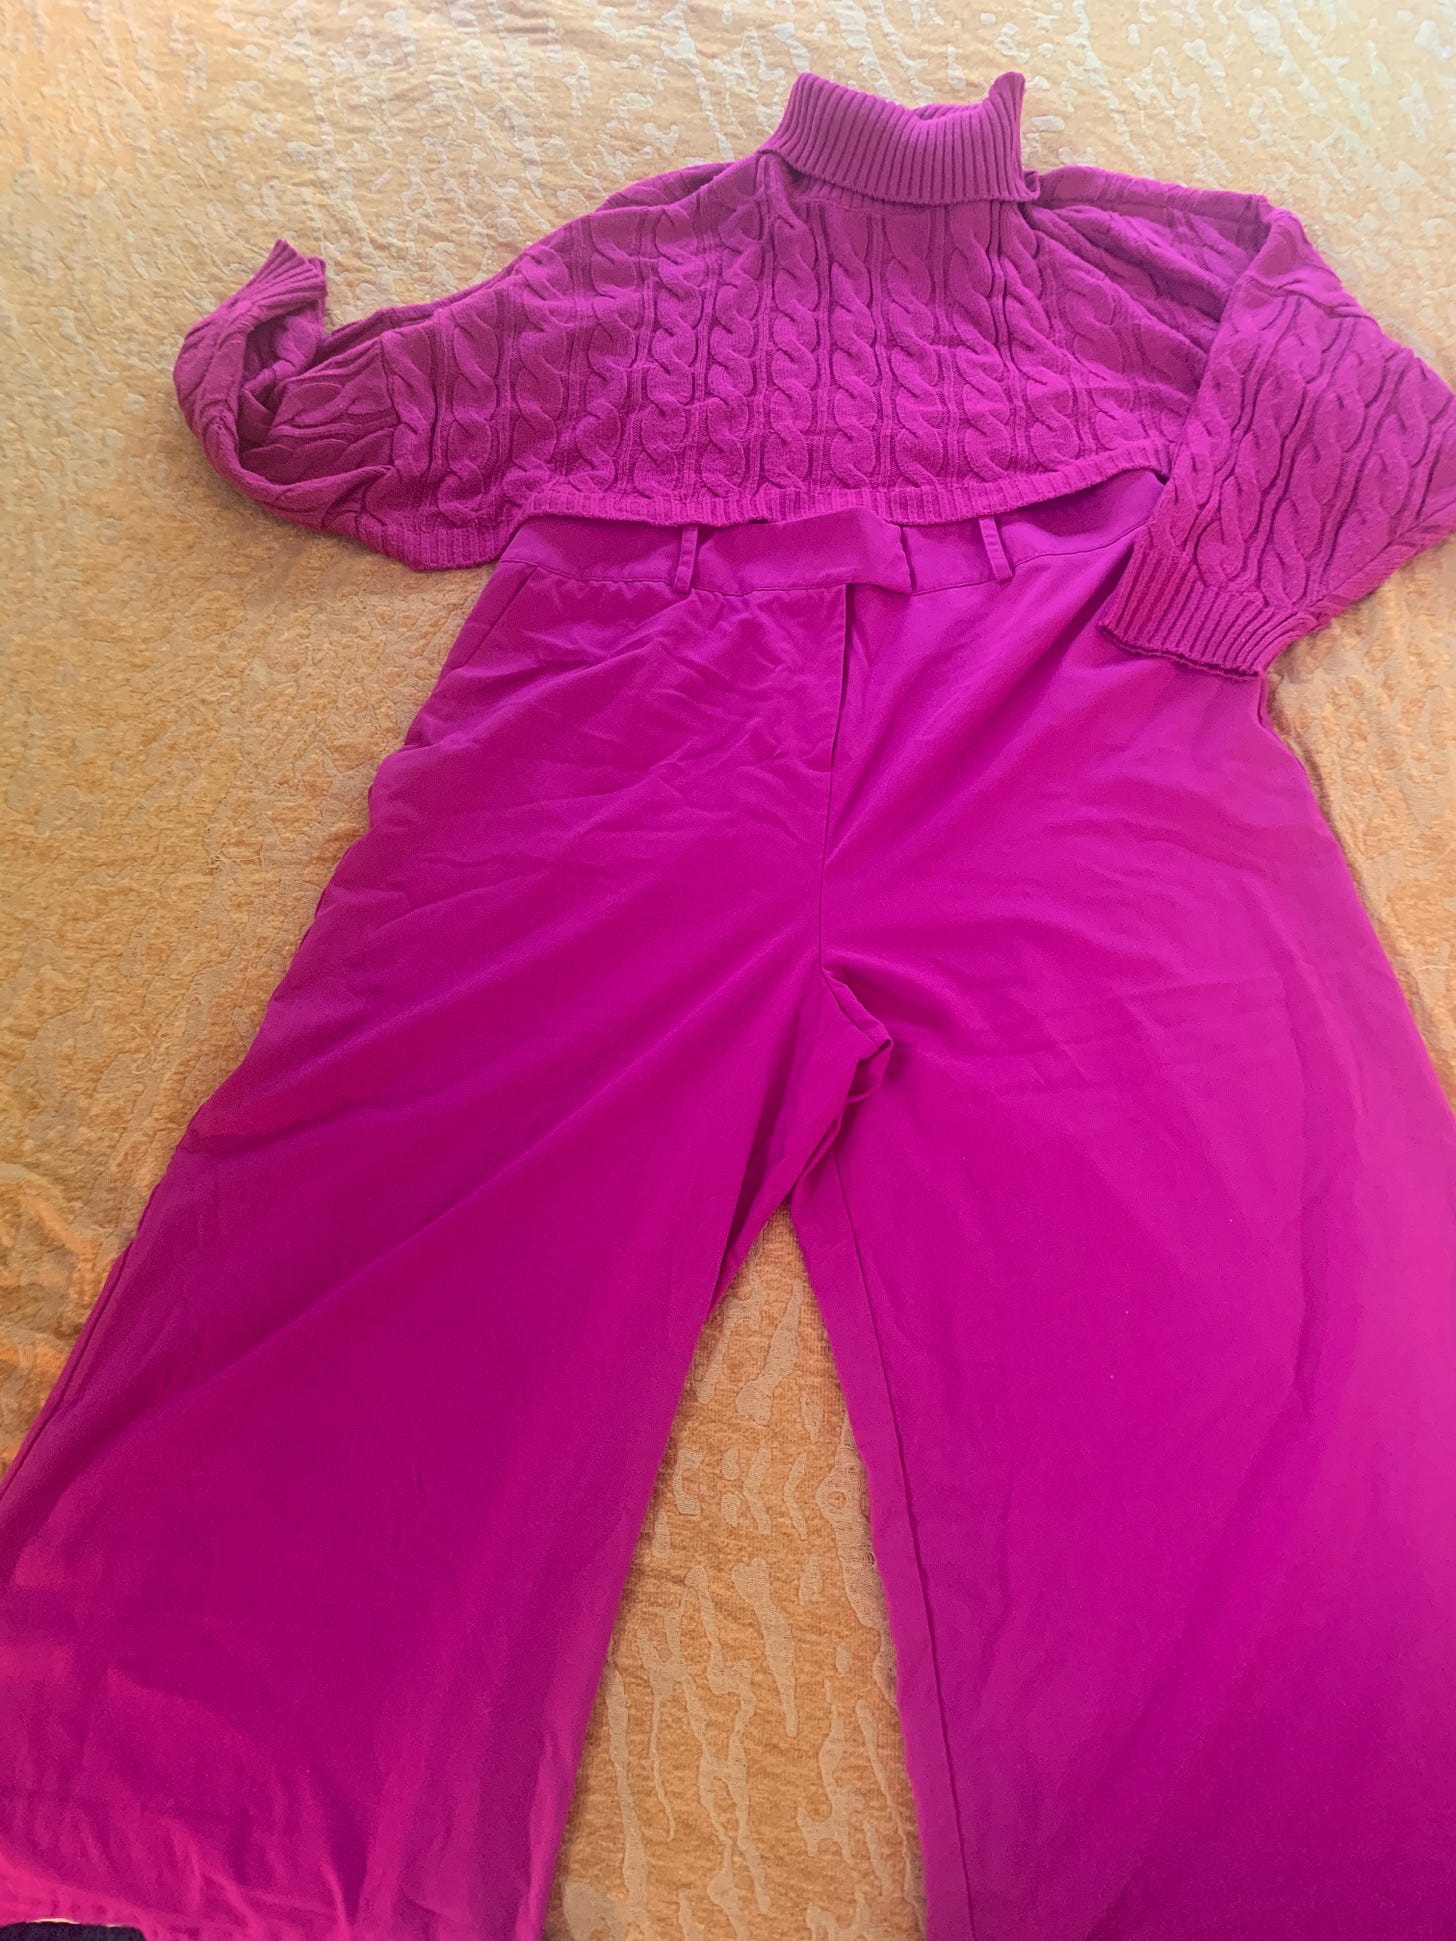 Hot pink turtleneck sweater, hot pink wide legged pants laid out on Caissie's bedspread